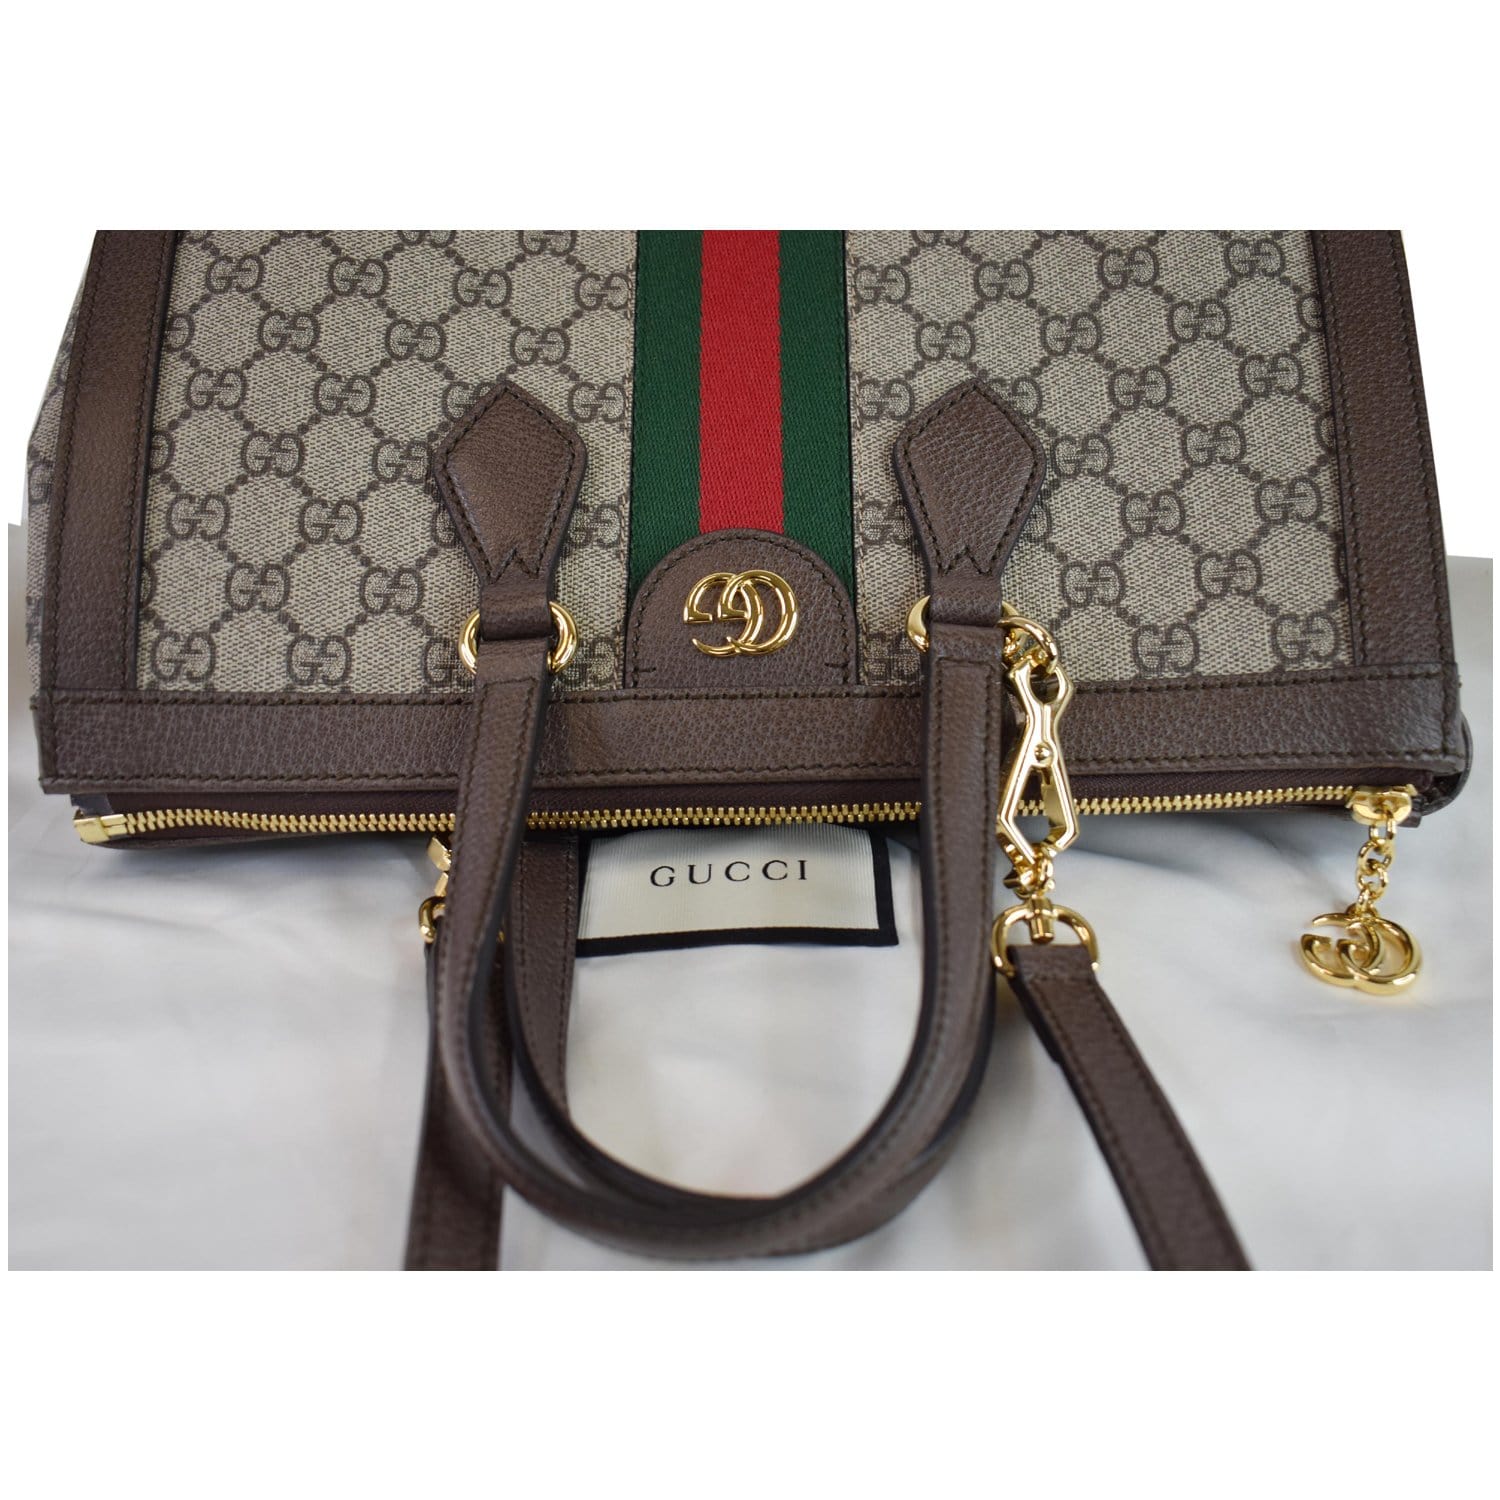 Gucci, Bags, Soldauthentic Gucci Ophidia Tote